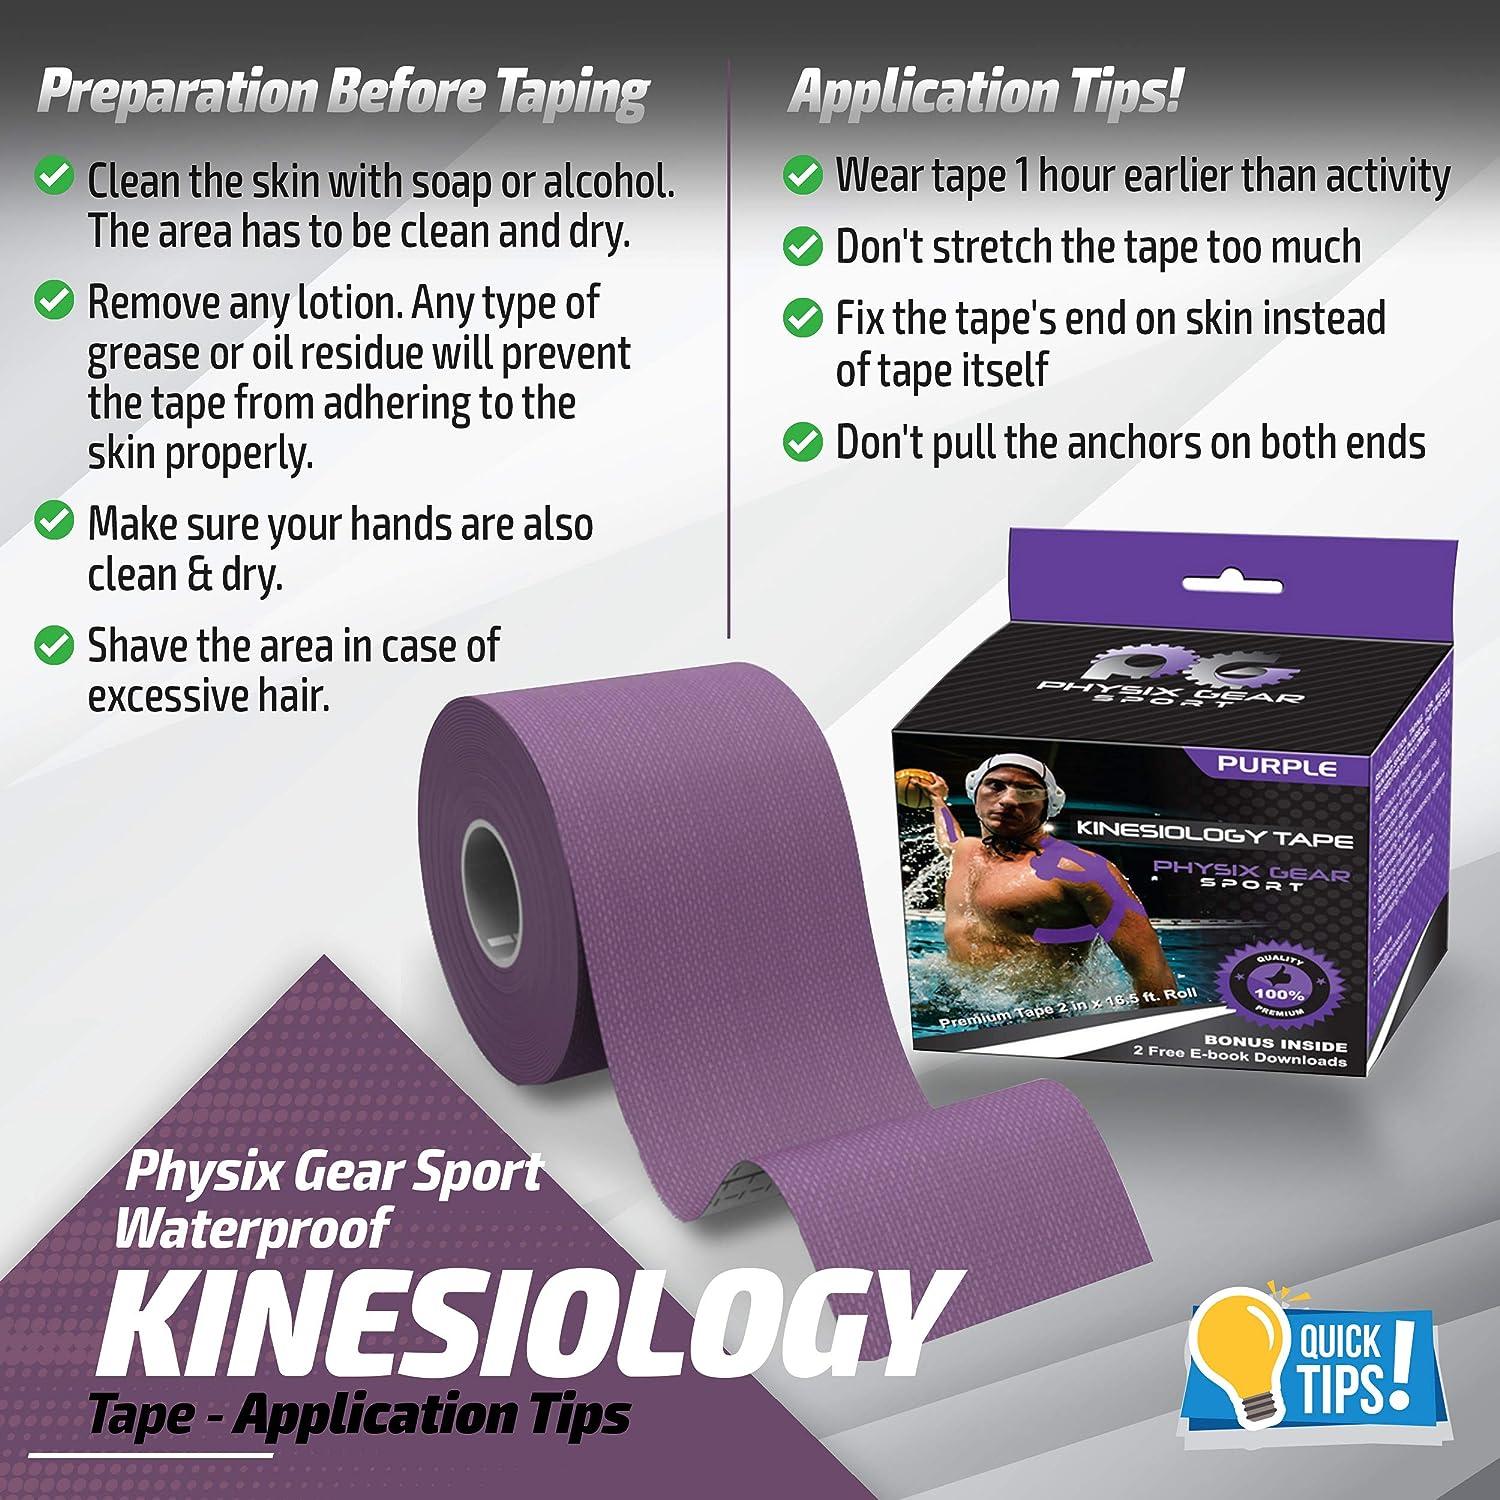 Physix Gear Sport Kinesiology Tape (2 Pack or 1 Pack) Best